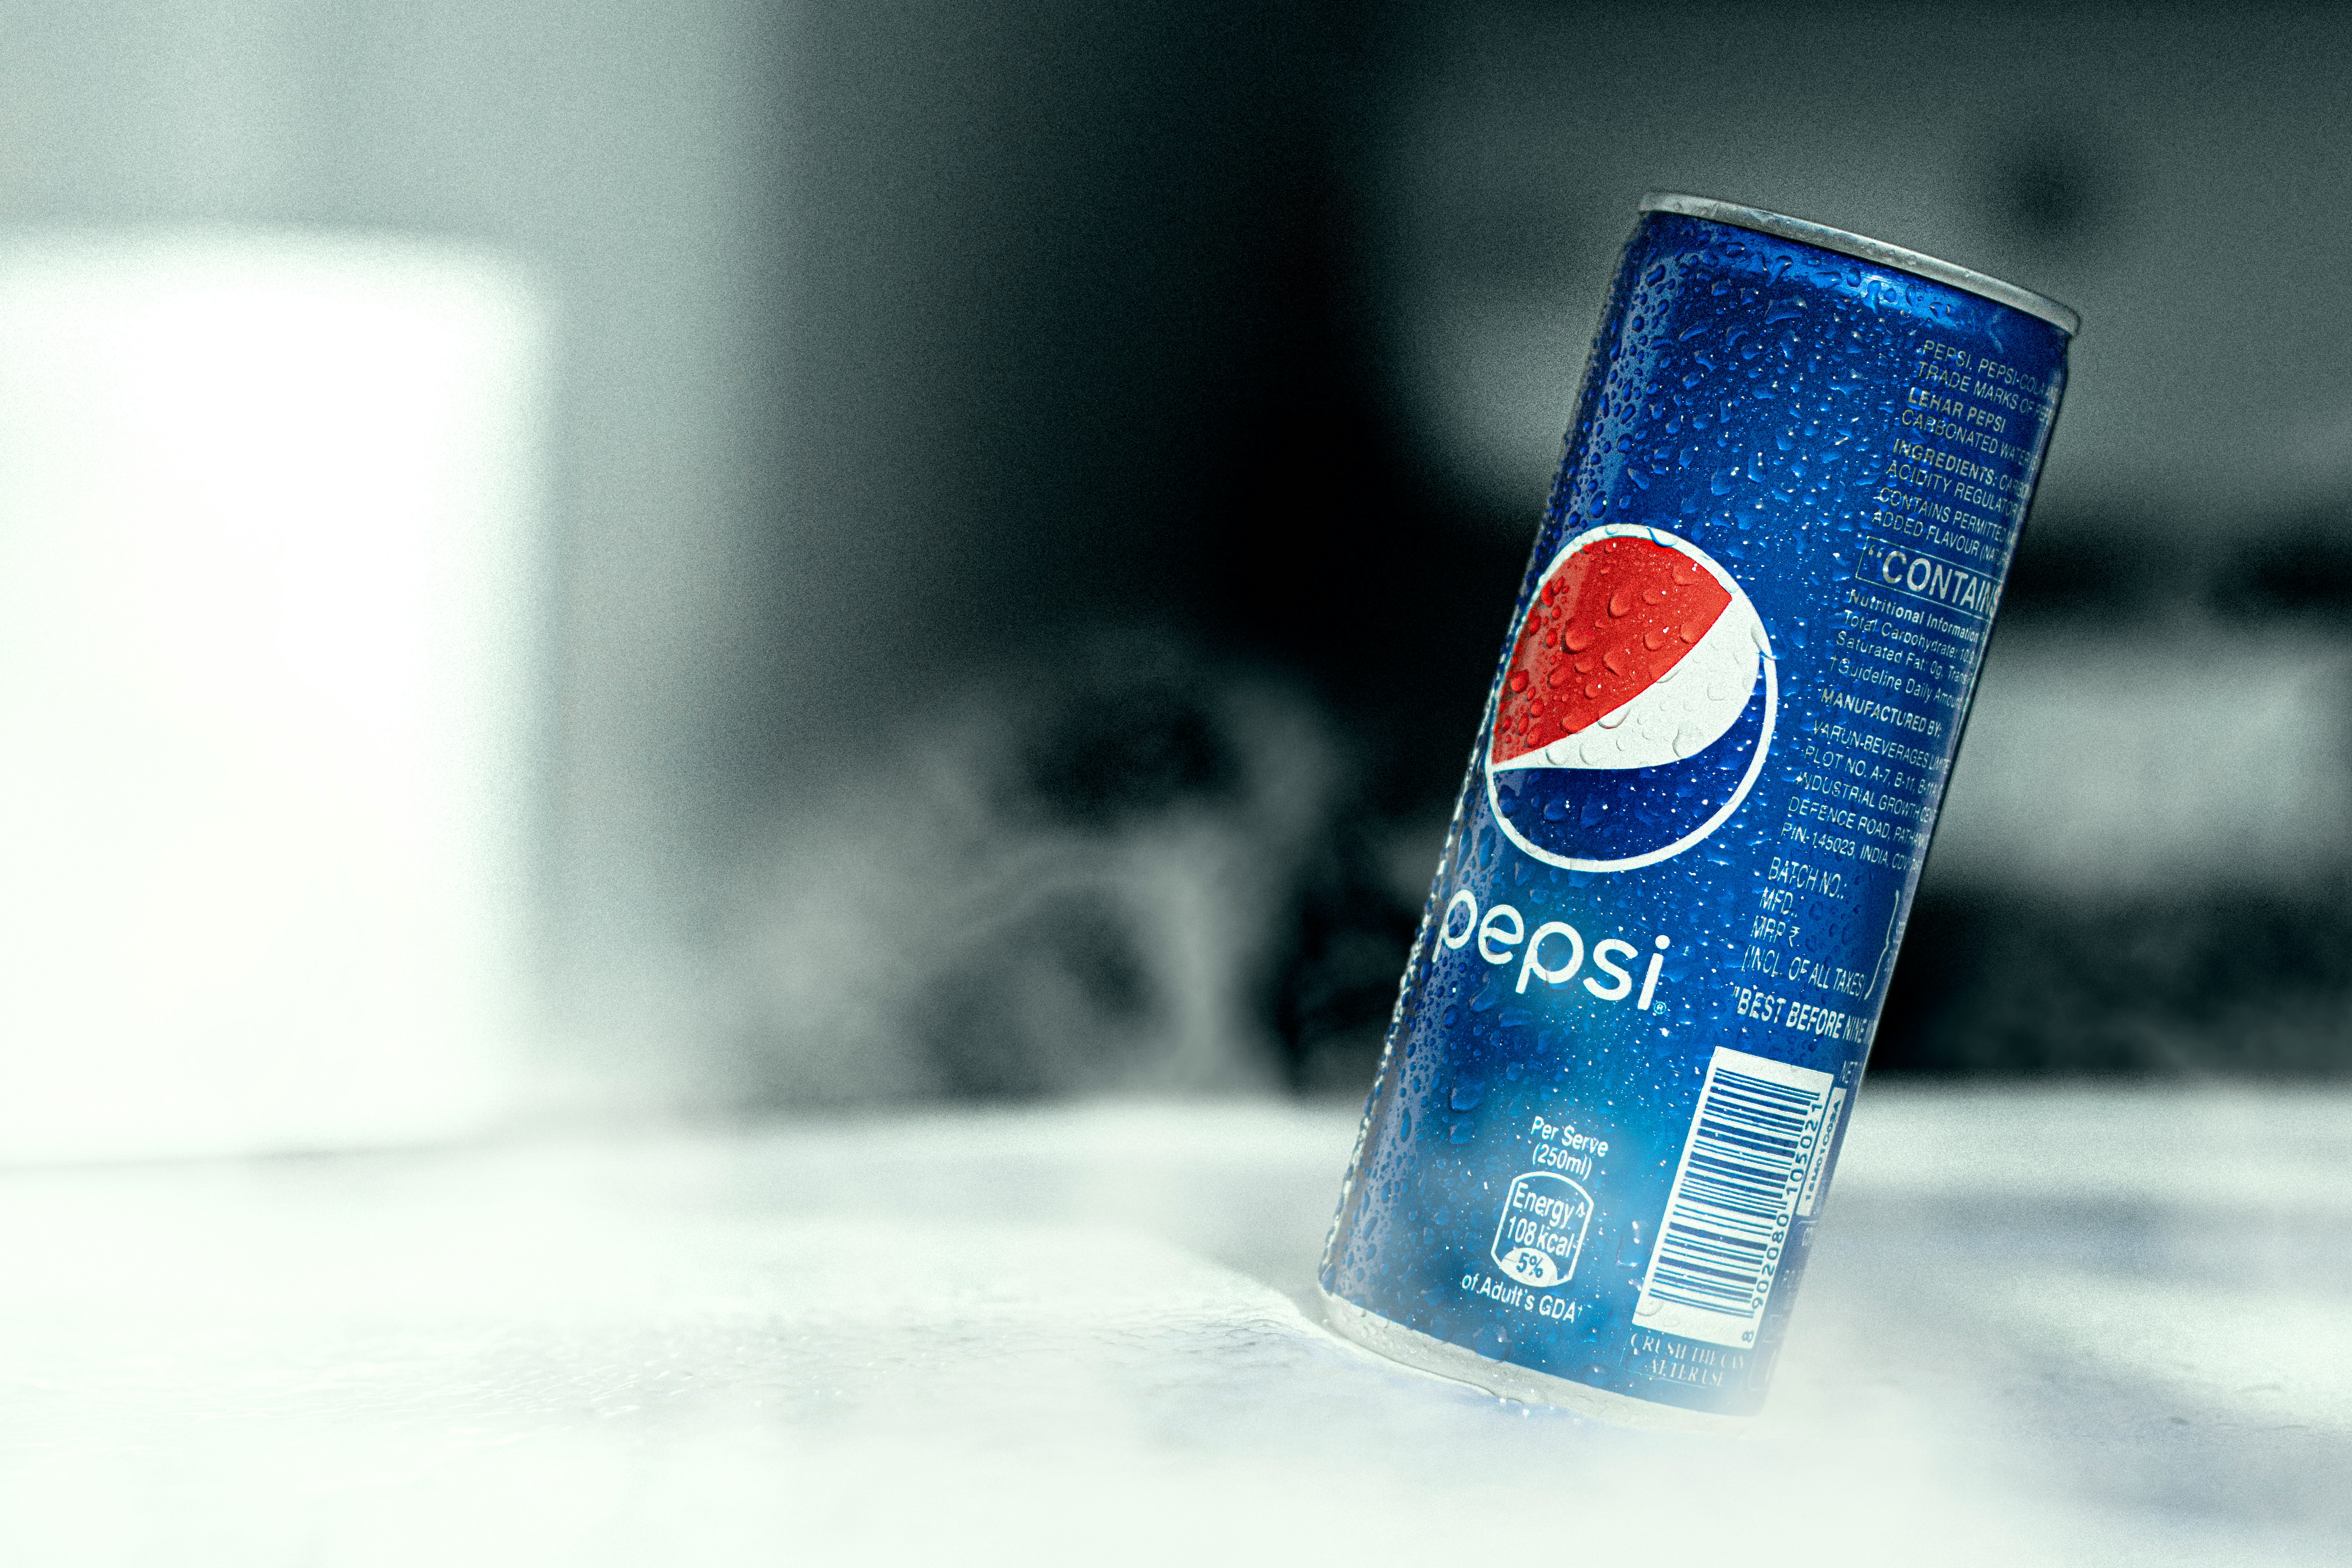 A Pepsi can tilting tot he right